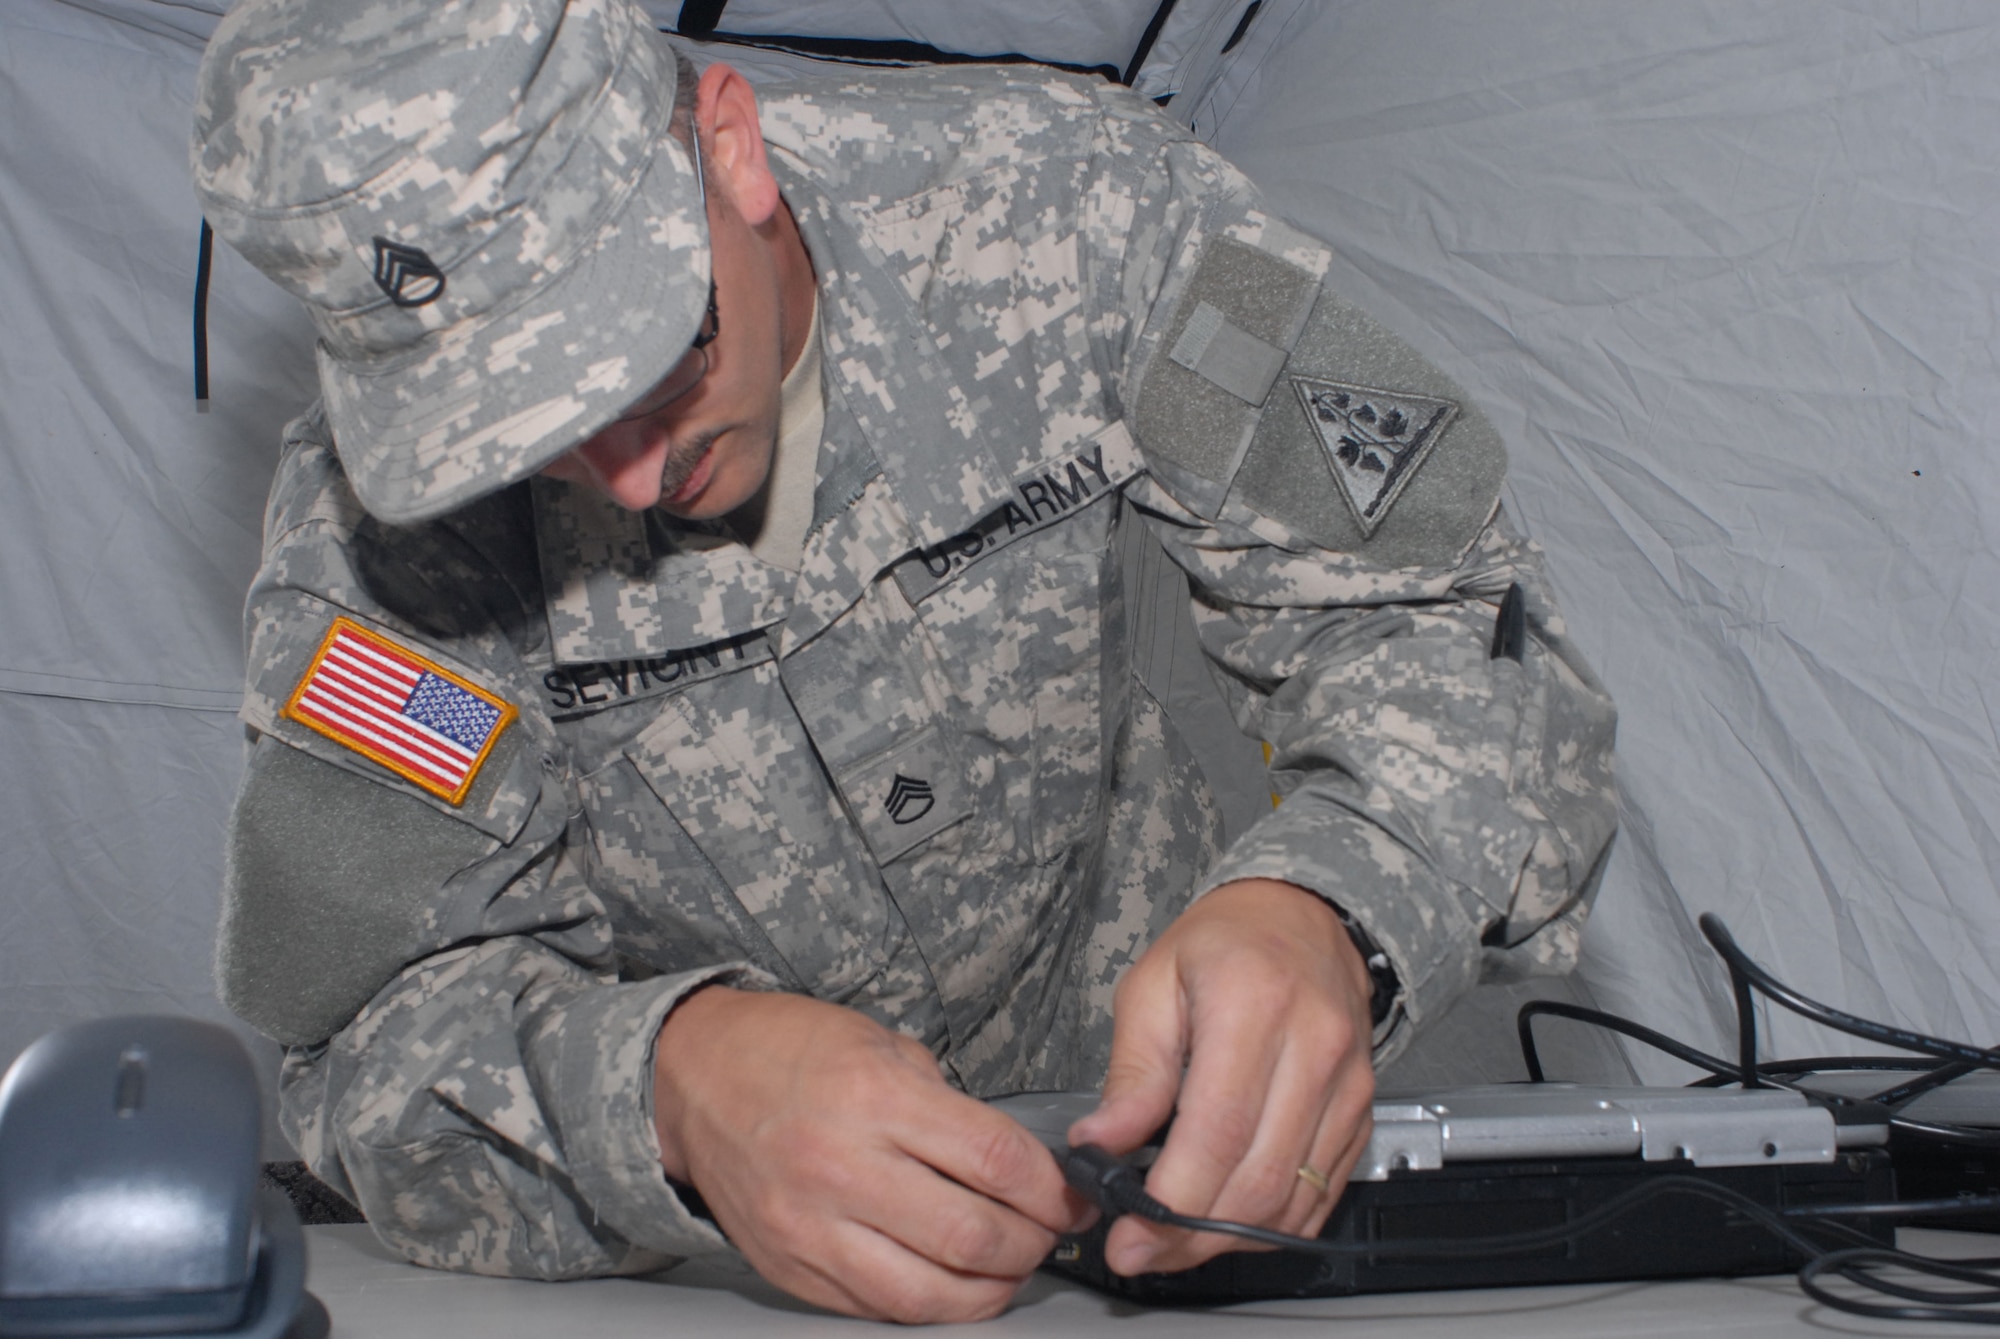 Army National Guardsman, Staff Sgt. Ted Sevigny, Joint Forces Headquarters, Hartford, Connecticut, connects a laptop to the Joint Incident Site Communication Capability (JISCC) system during the June 5, 2008 deployed training exercise at Camp Rell, Niantic, Connecticut.  Connecticut Air and Army National Guard units train together on deploying the JISCC equipment, which allows federal, military, state and local emergency services to coordinate disaster relief efforts with real-time communication. (U.S. Air Force photo by Staff Sgt. Nicholas A. McCorkle) 